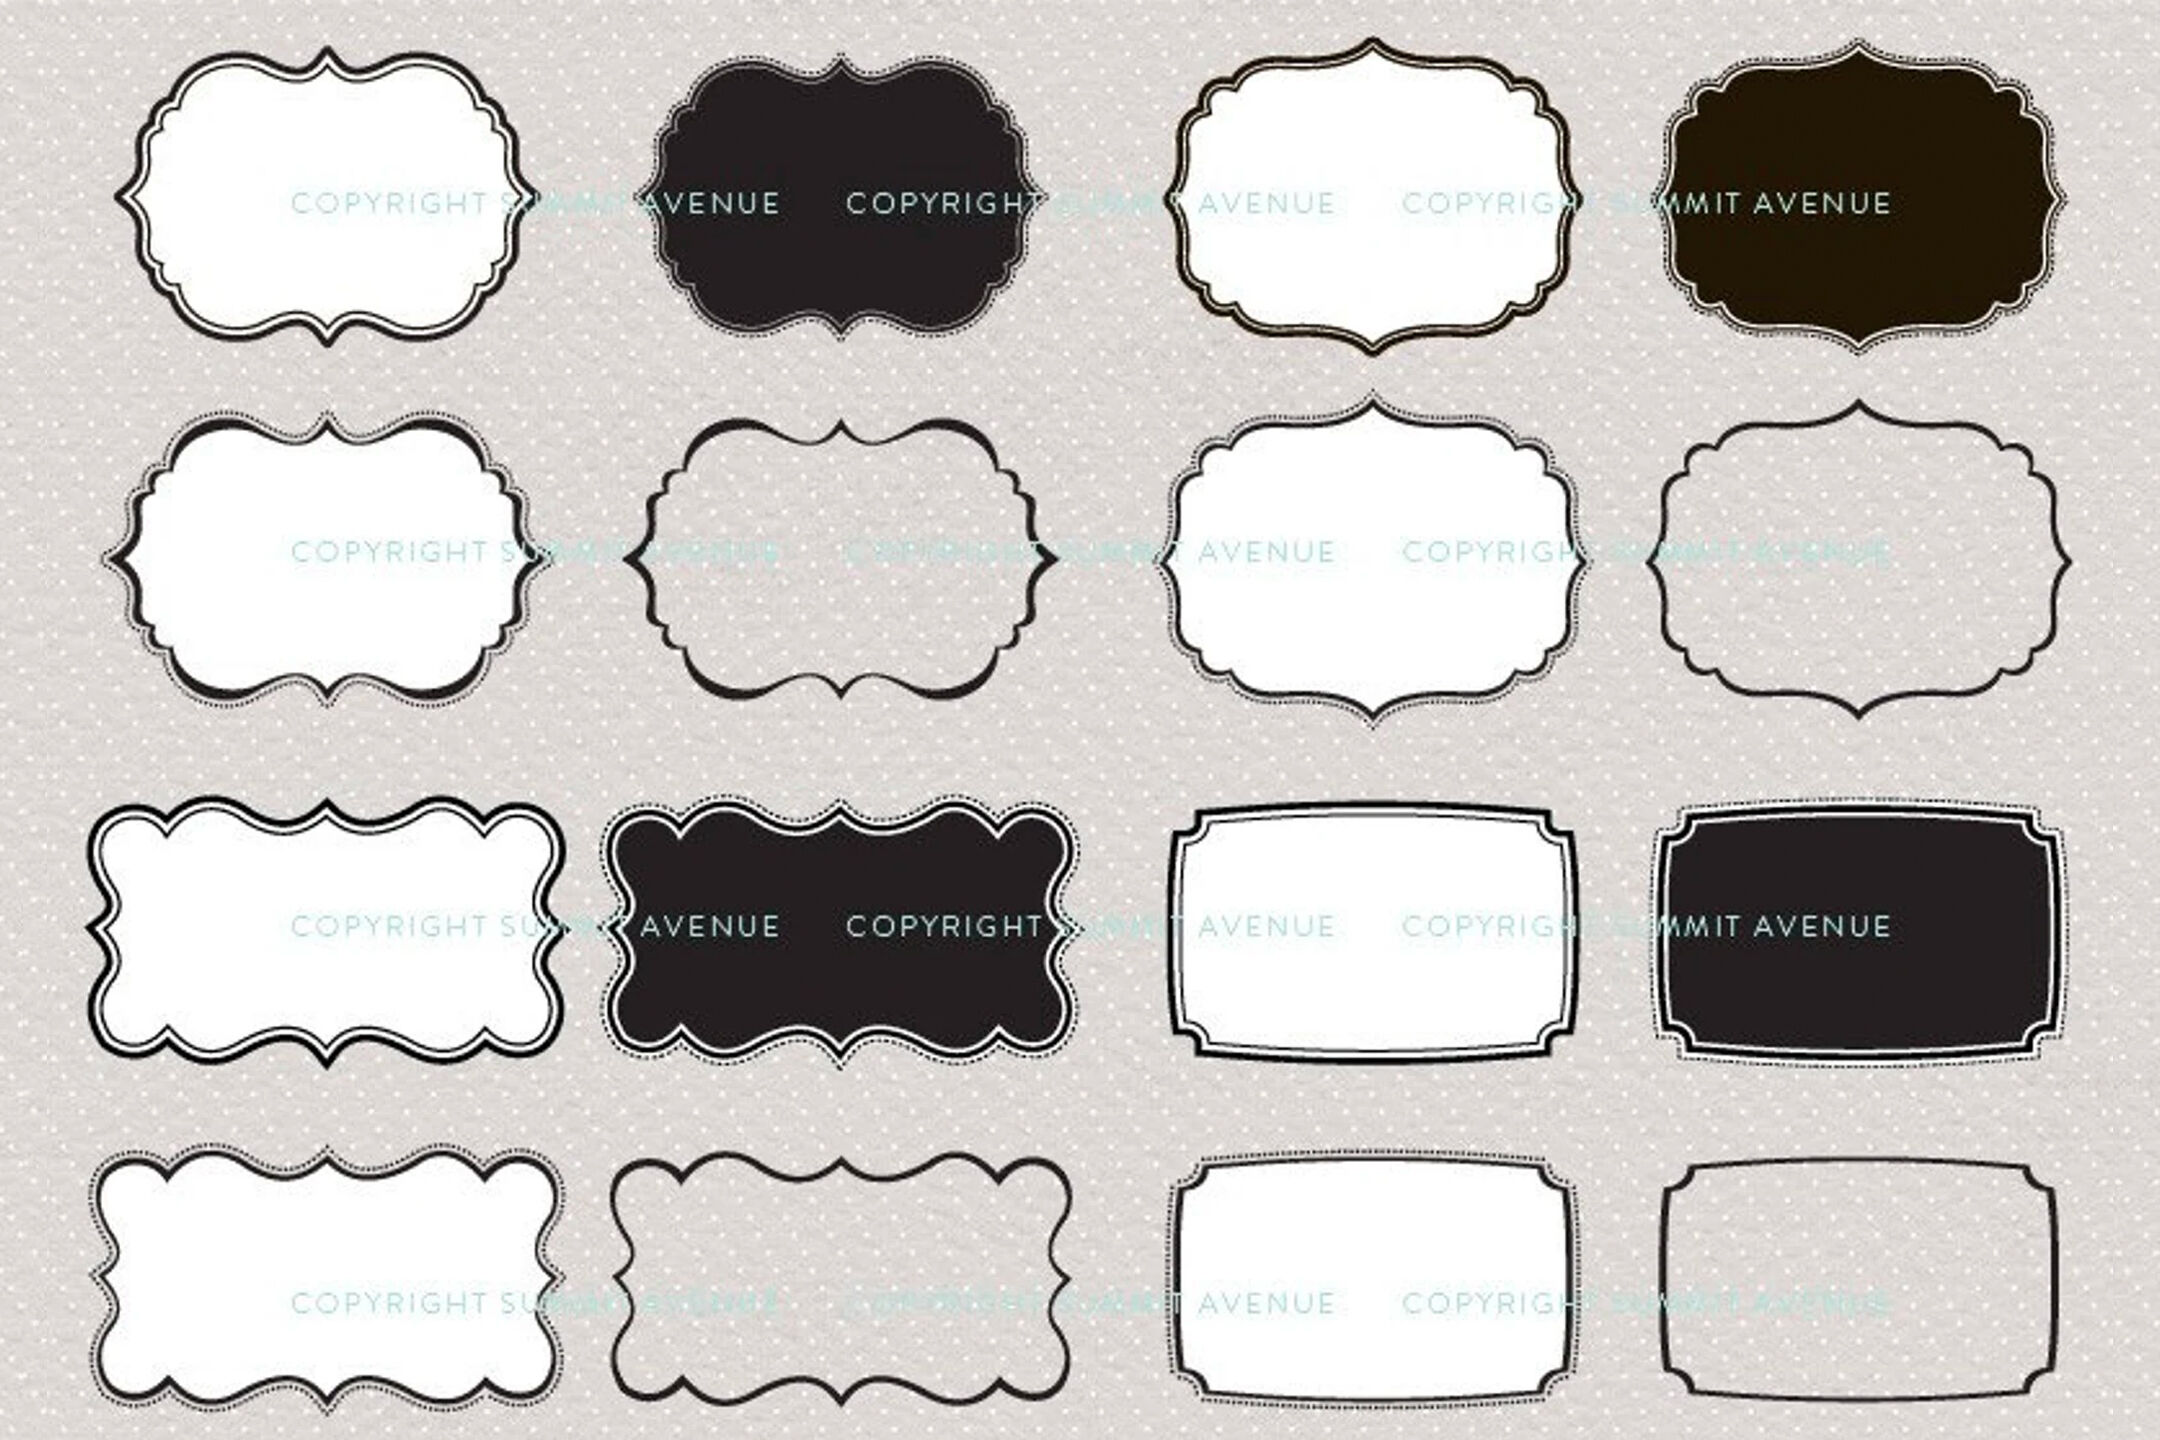 free printable label shapes